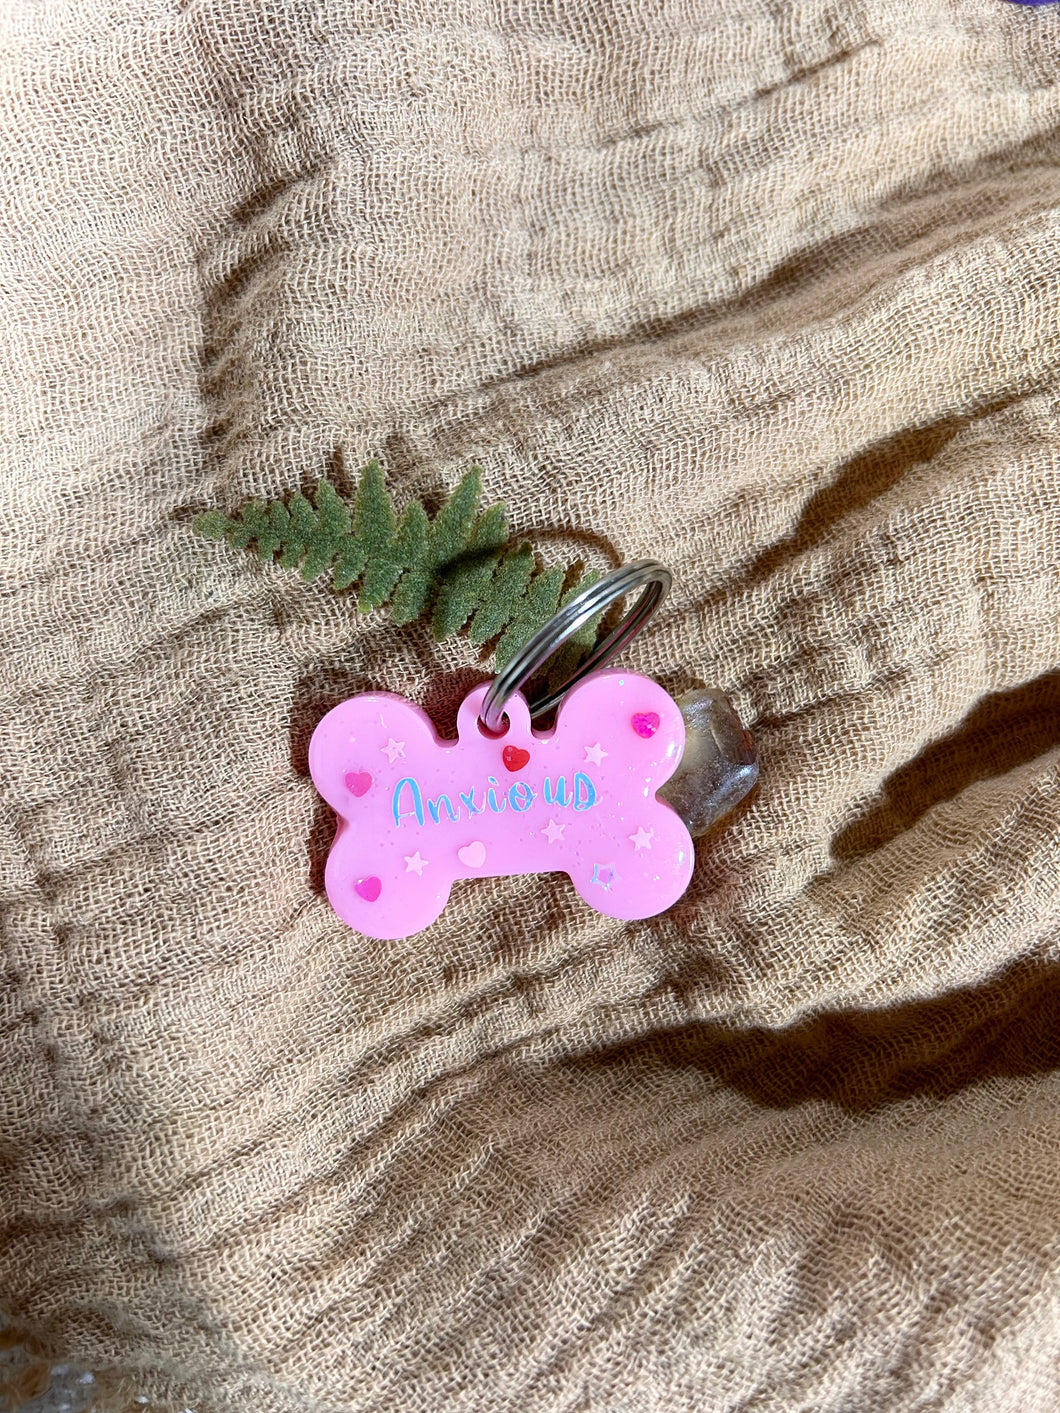 “Anxious” sparkly pink bone pet tag